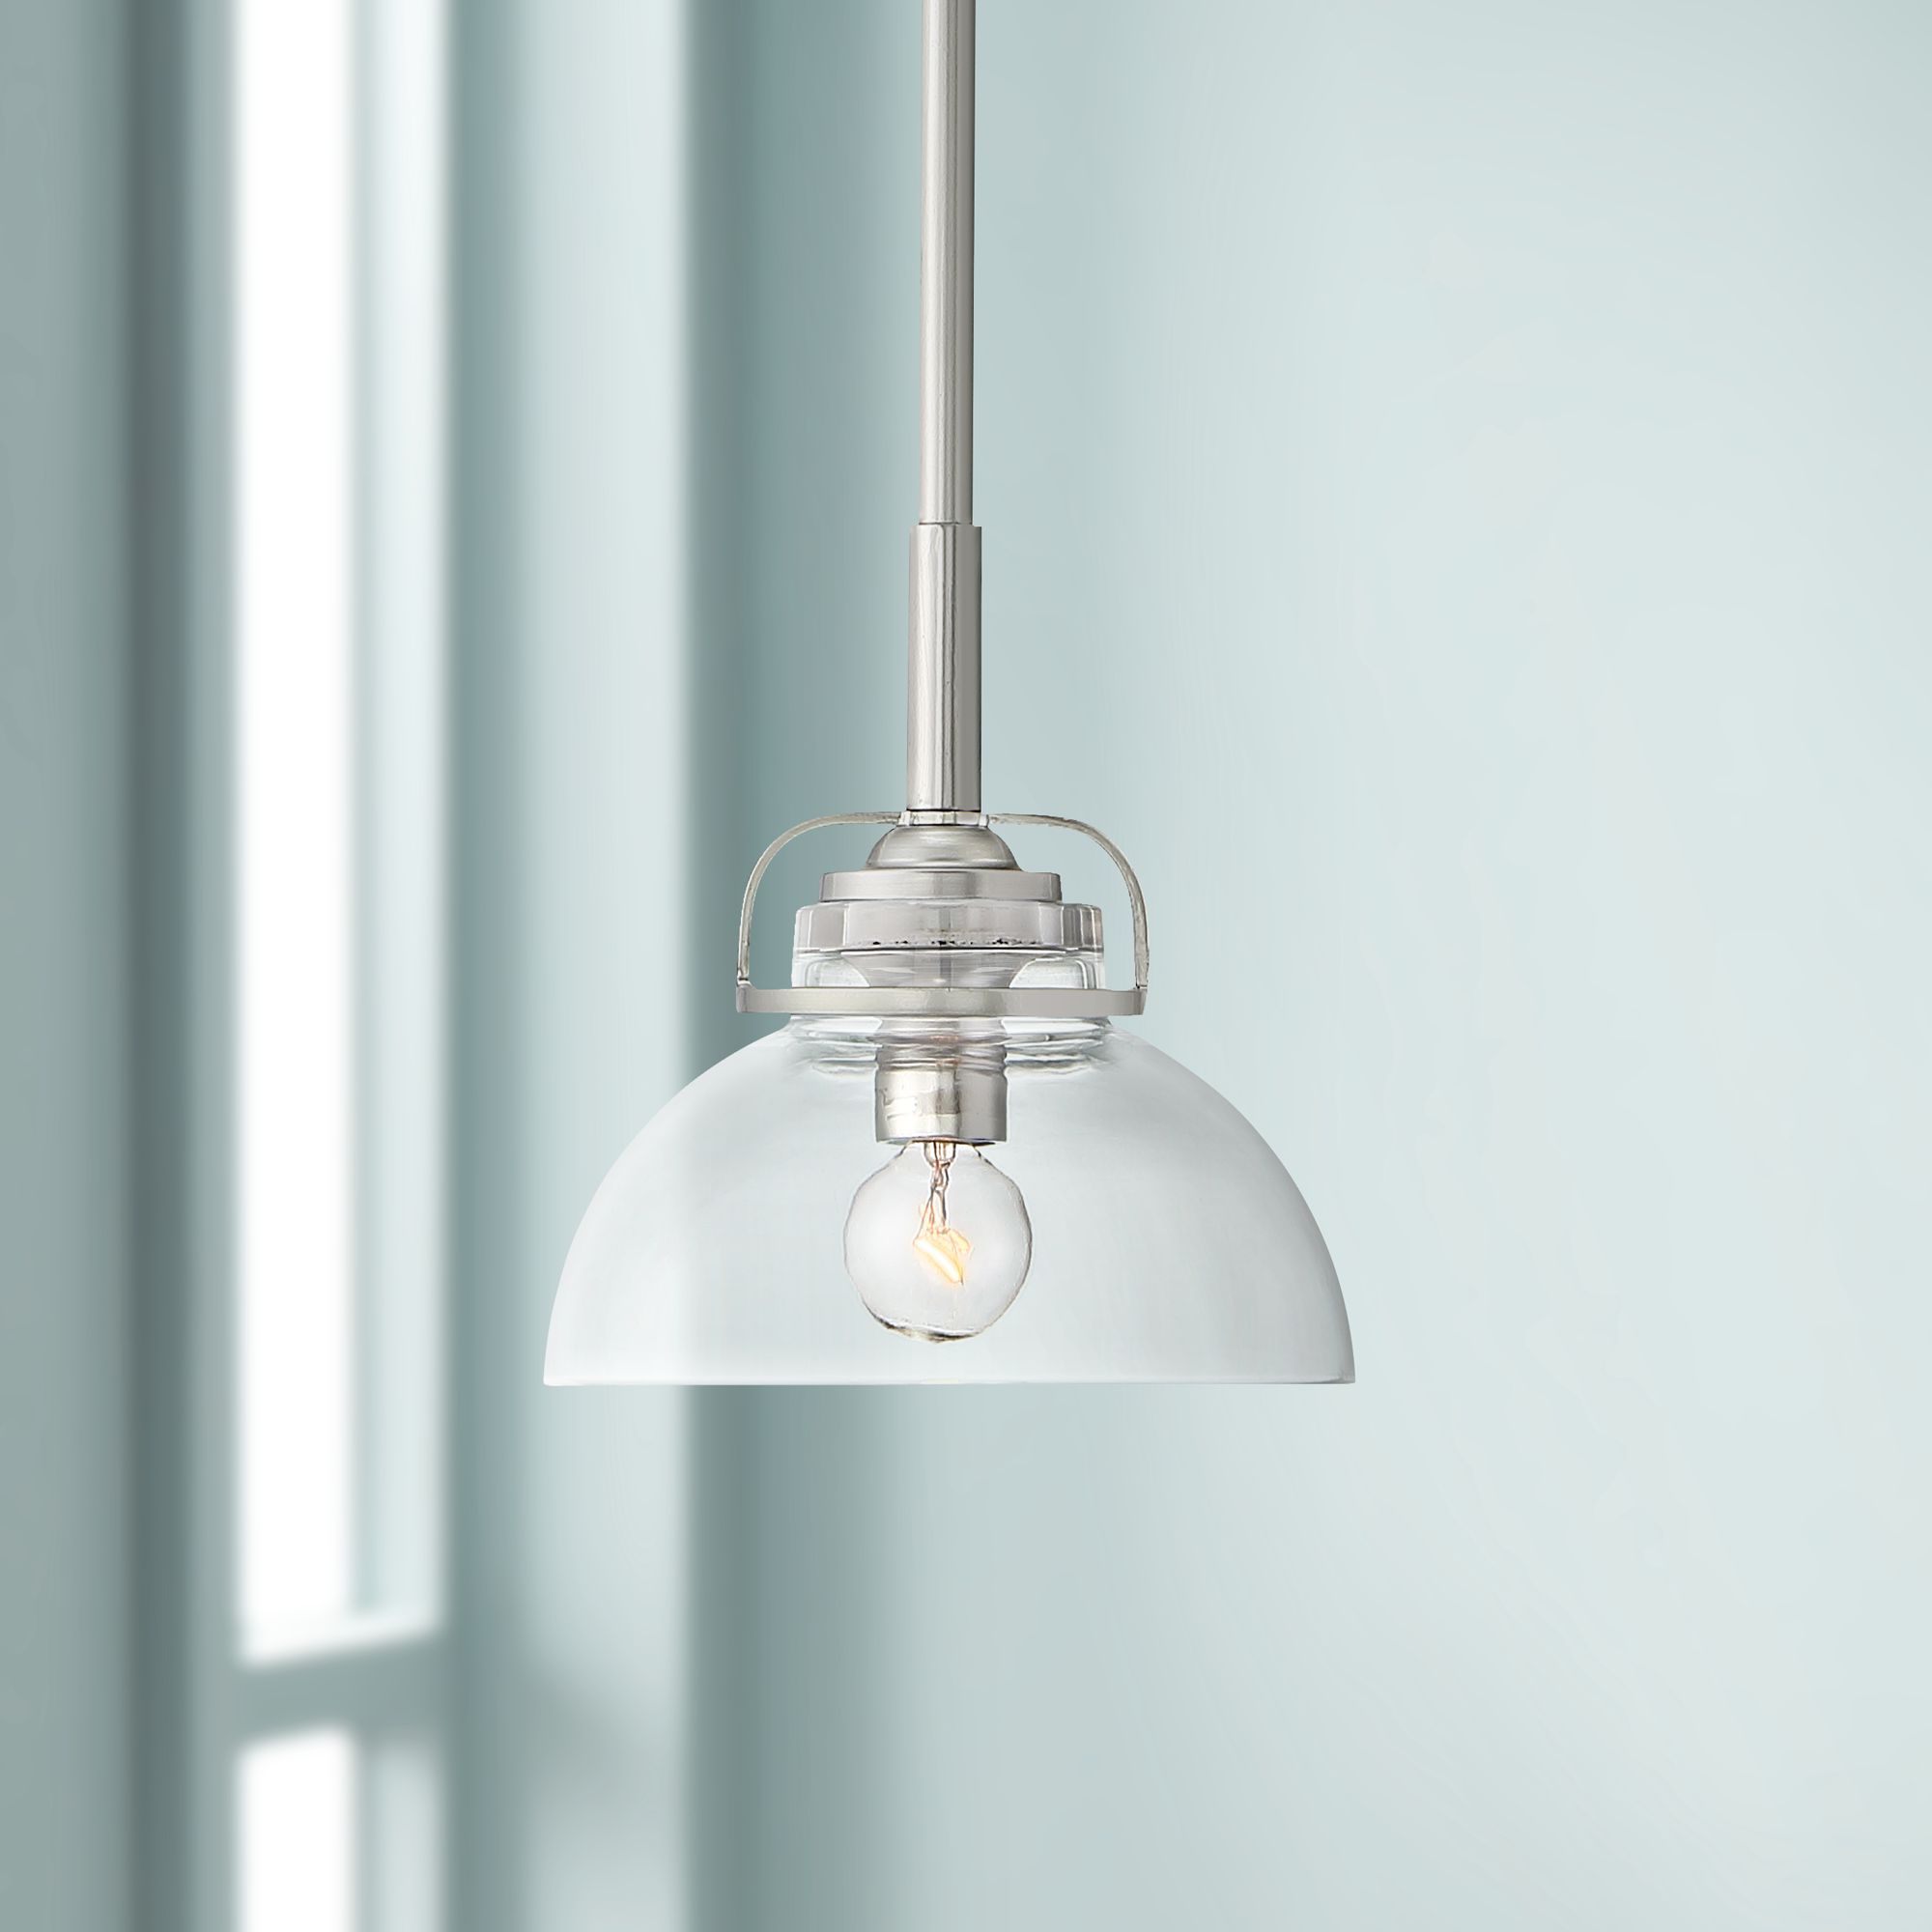 Possini Euro Design Brushed Nickel Mini Pendant Light 6 1 Intended For Best And Newest Gray And Nickel Kitchen Island Light Pendants Lights (View 10 of 15)